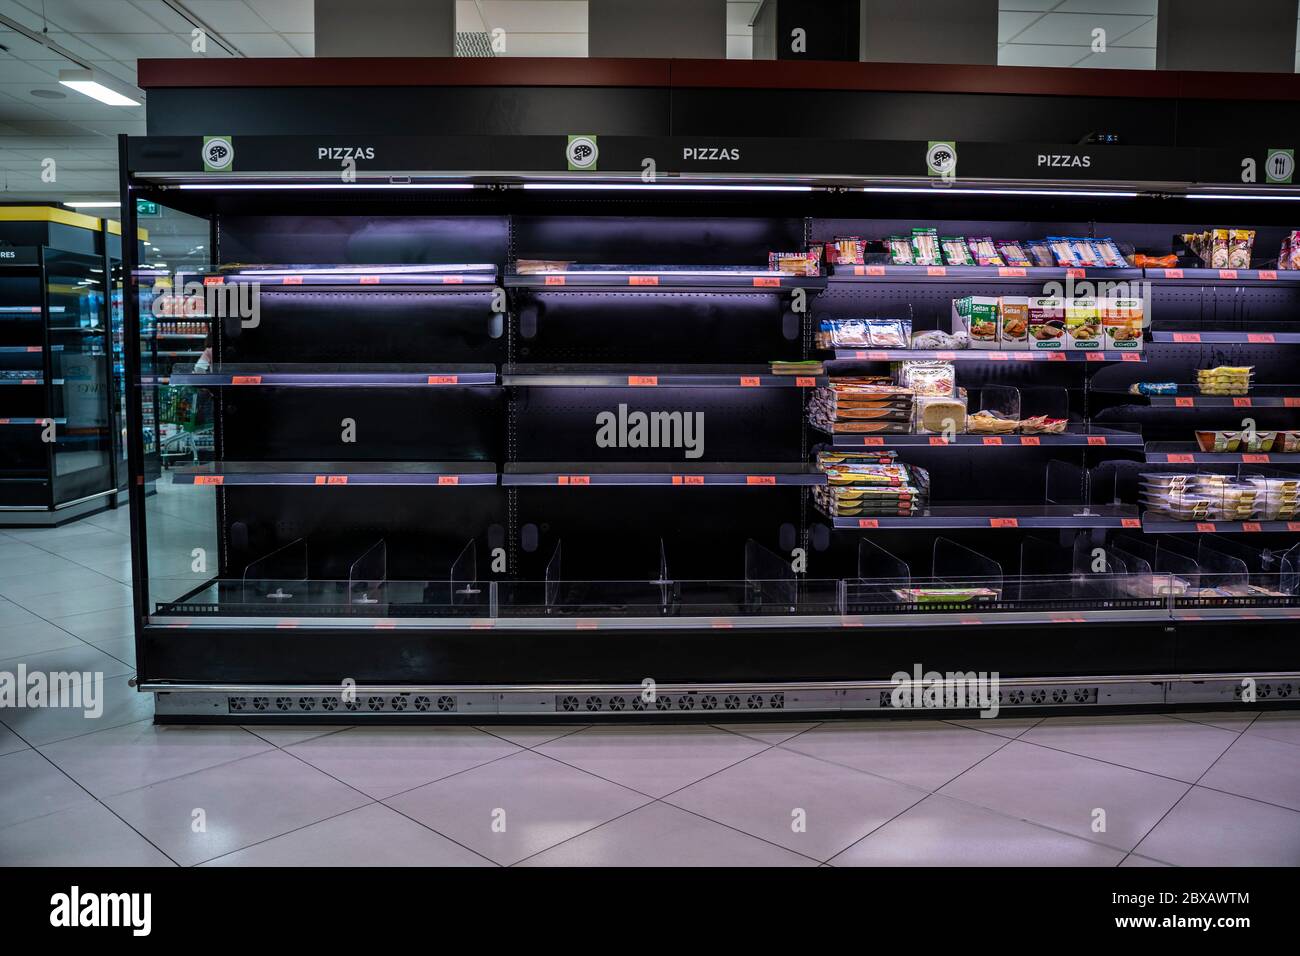 Coronavirus. Empty supermarket due to panic buying caused by COVID-19 crisis. Shortage of food and basic supplies on the shelves. Malaga, Spain - Marc Stock Photo